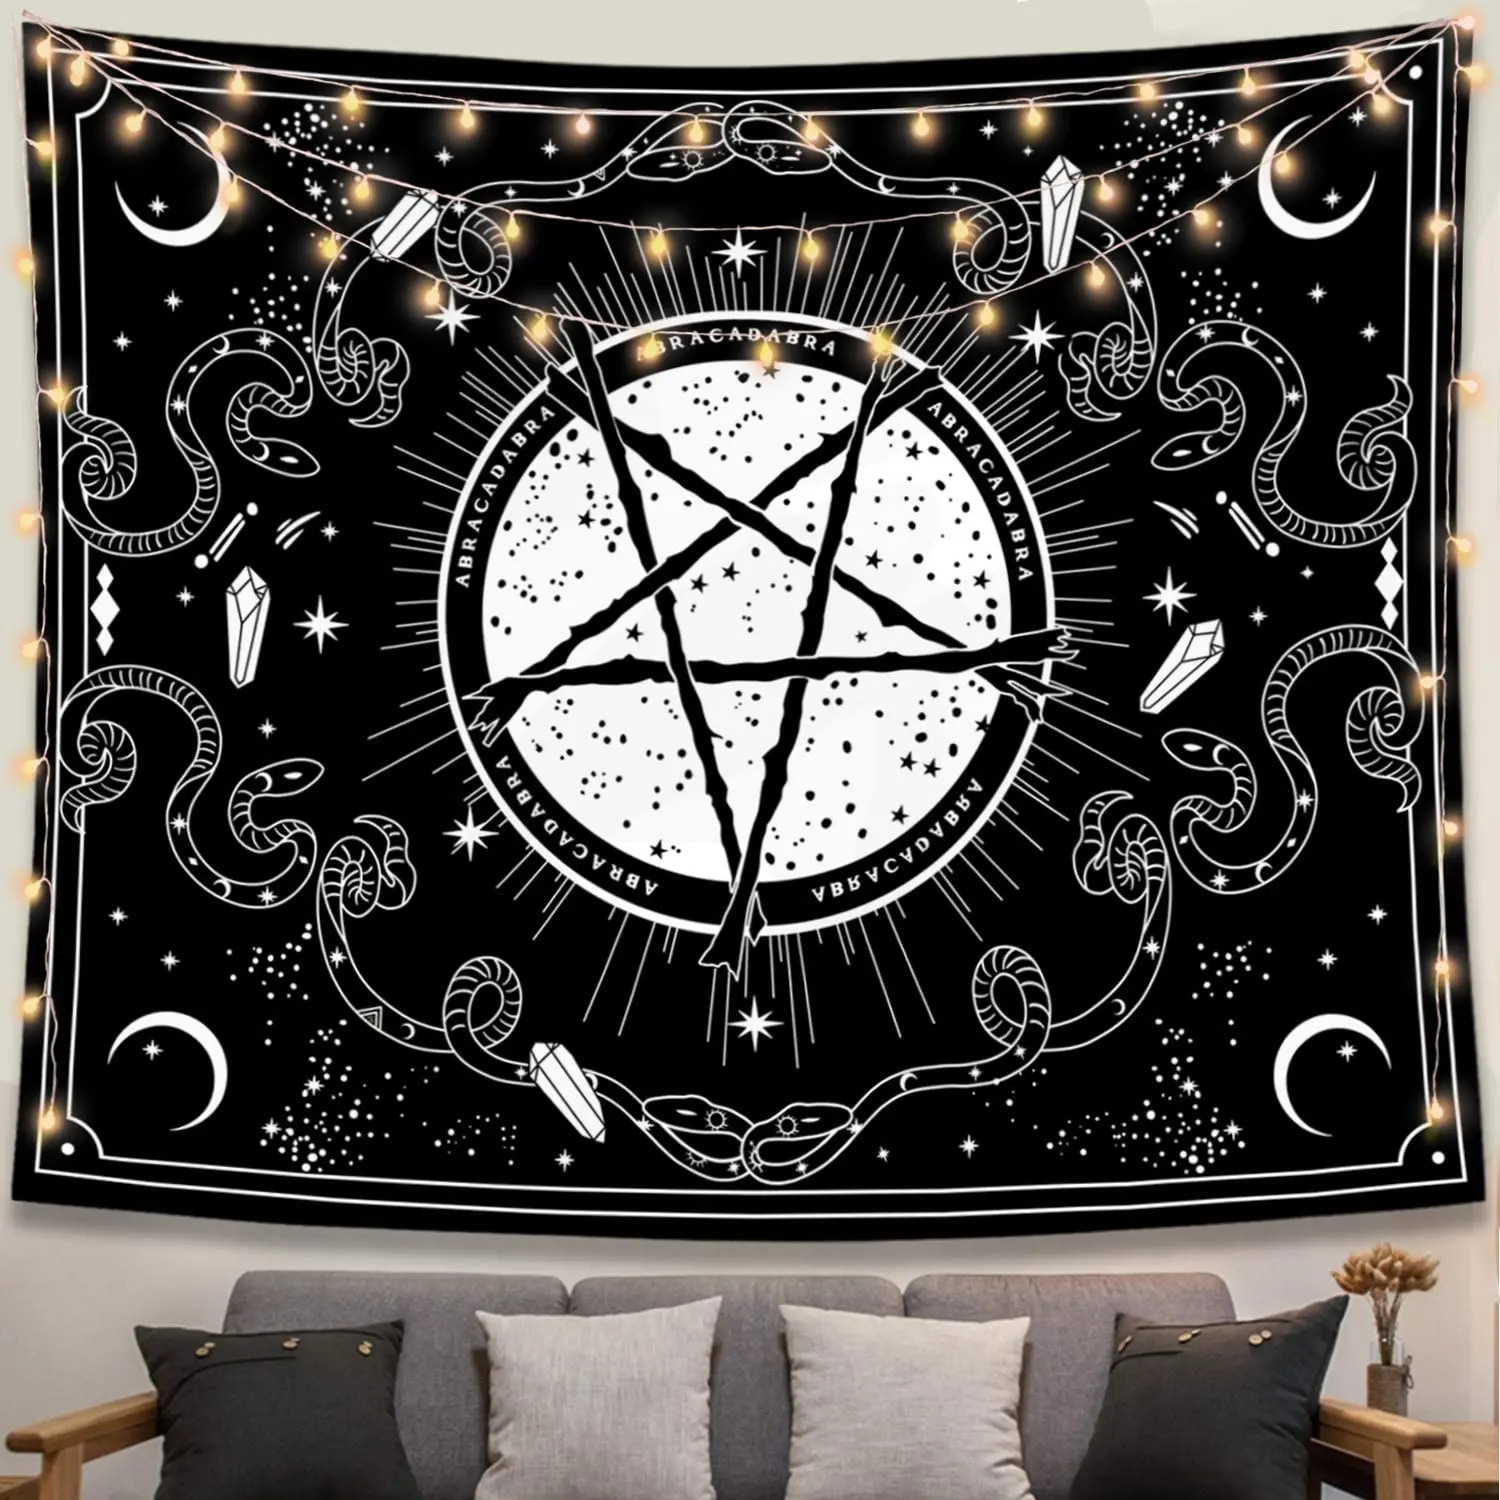 Gothic Witch Blessed Tapestry Wall Hanging，Black And White Pray Wall Tapestry With Moon Star And Snake Stone For Room Decor